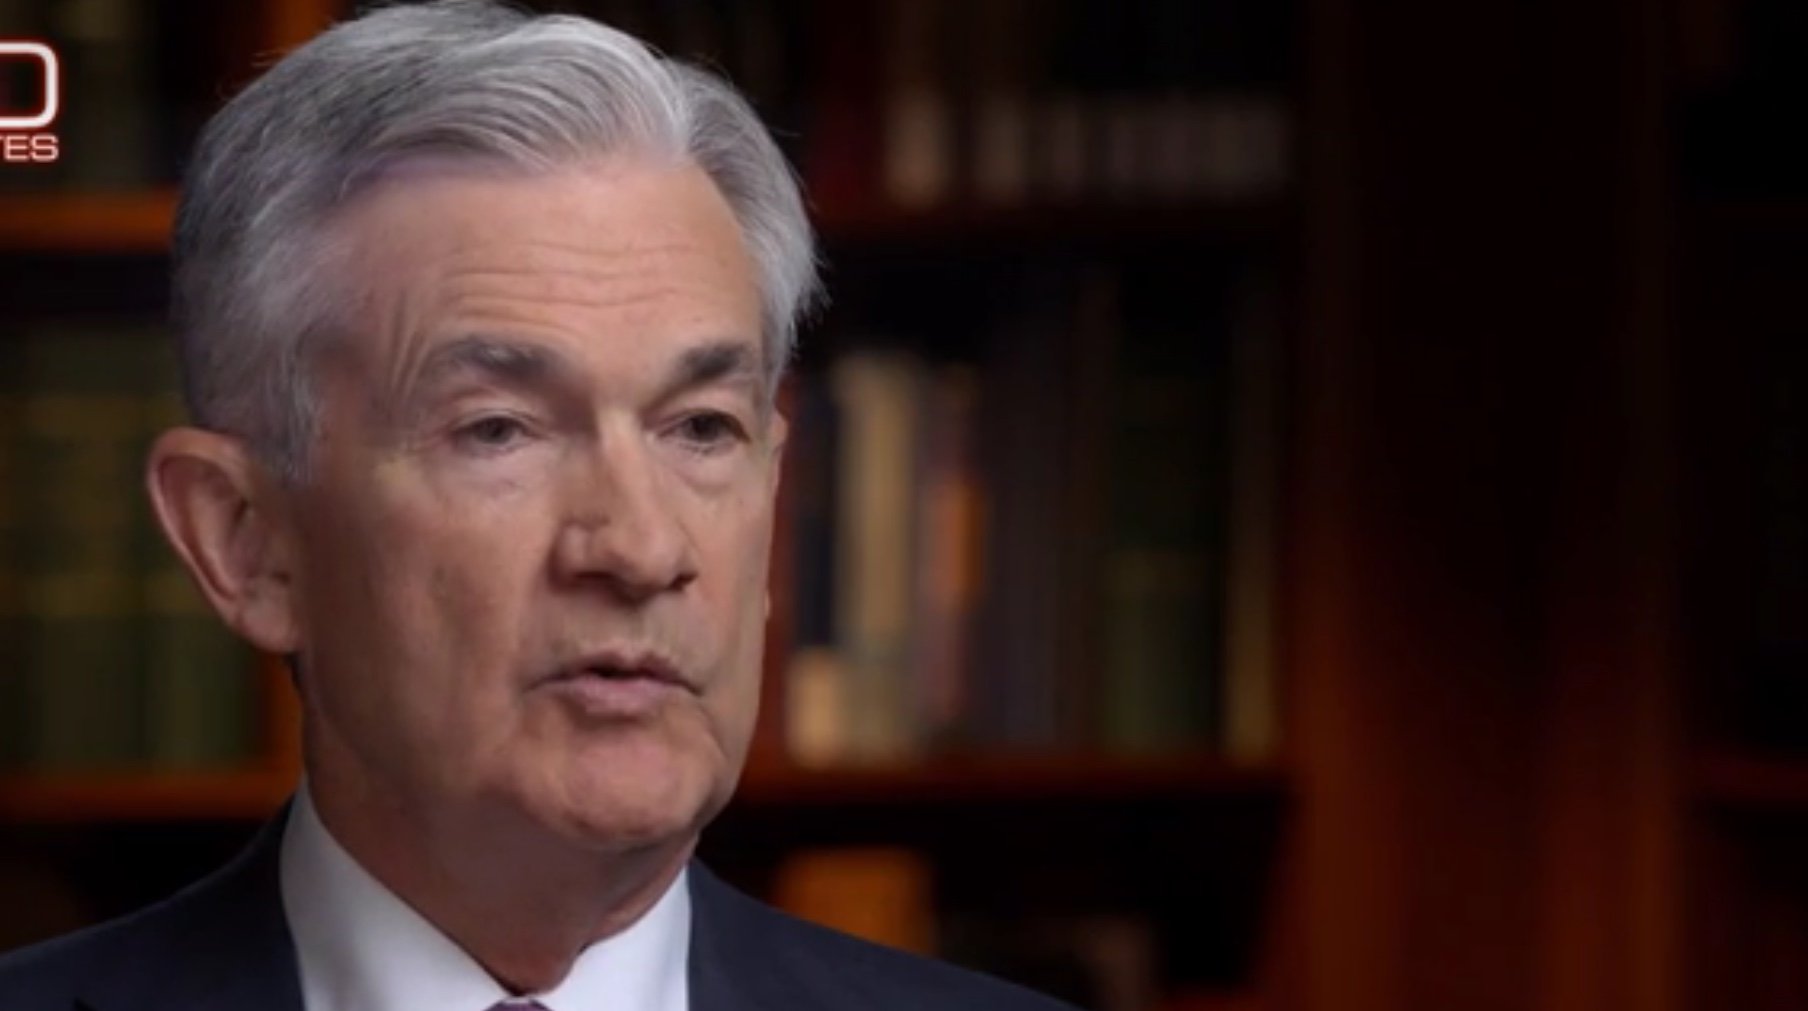 Federal Reserve Chairman Jerome Powell is interviewed on CBS News’ “60 Minutes,” March 10, 2019. CBS News screenshot.